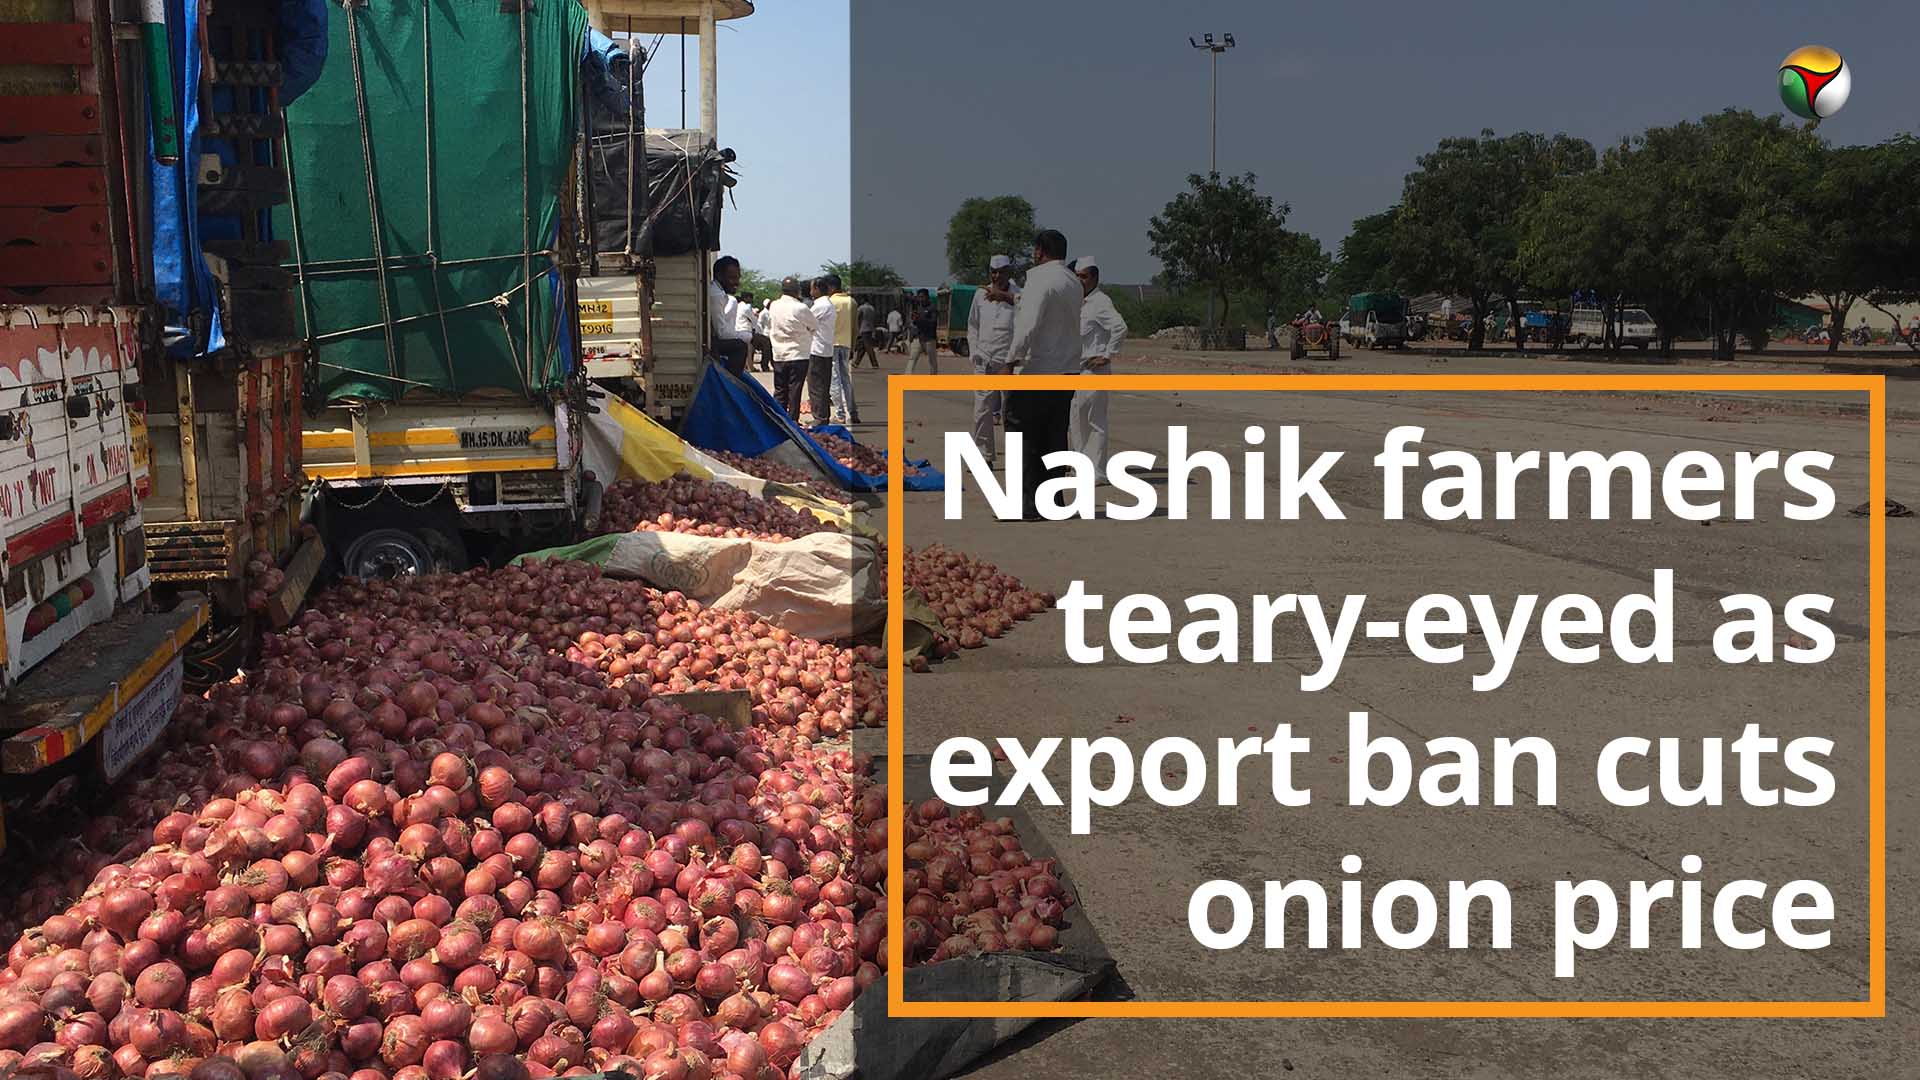 Nashik farmers teary-eyed as export ban cuts onion price